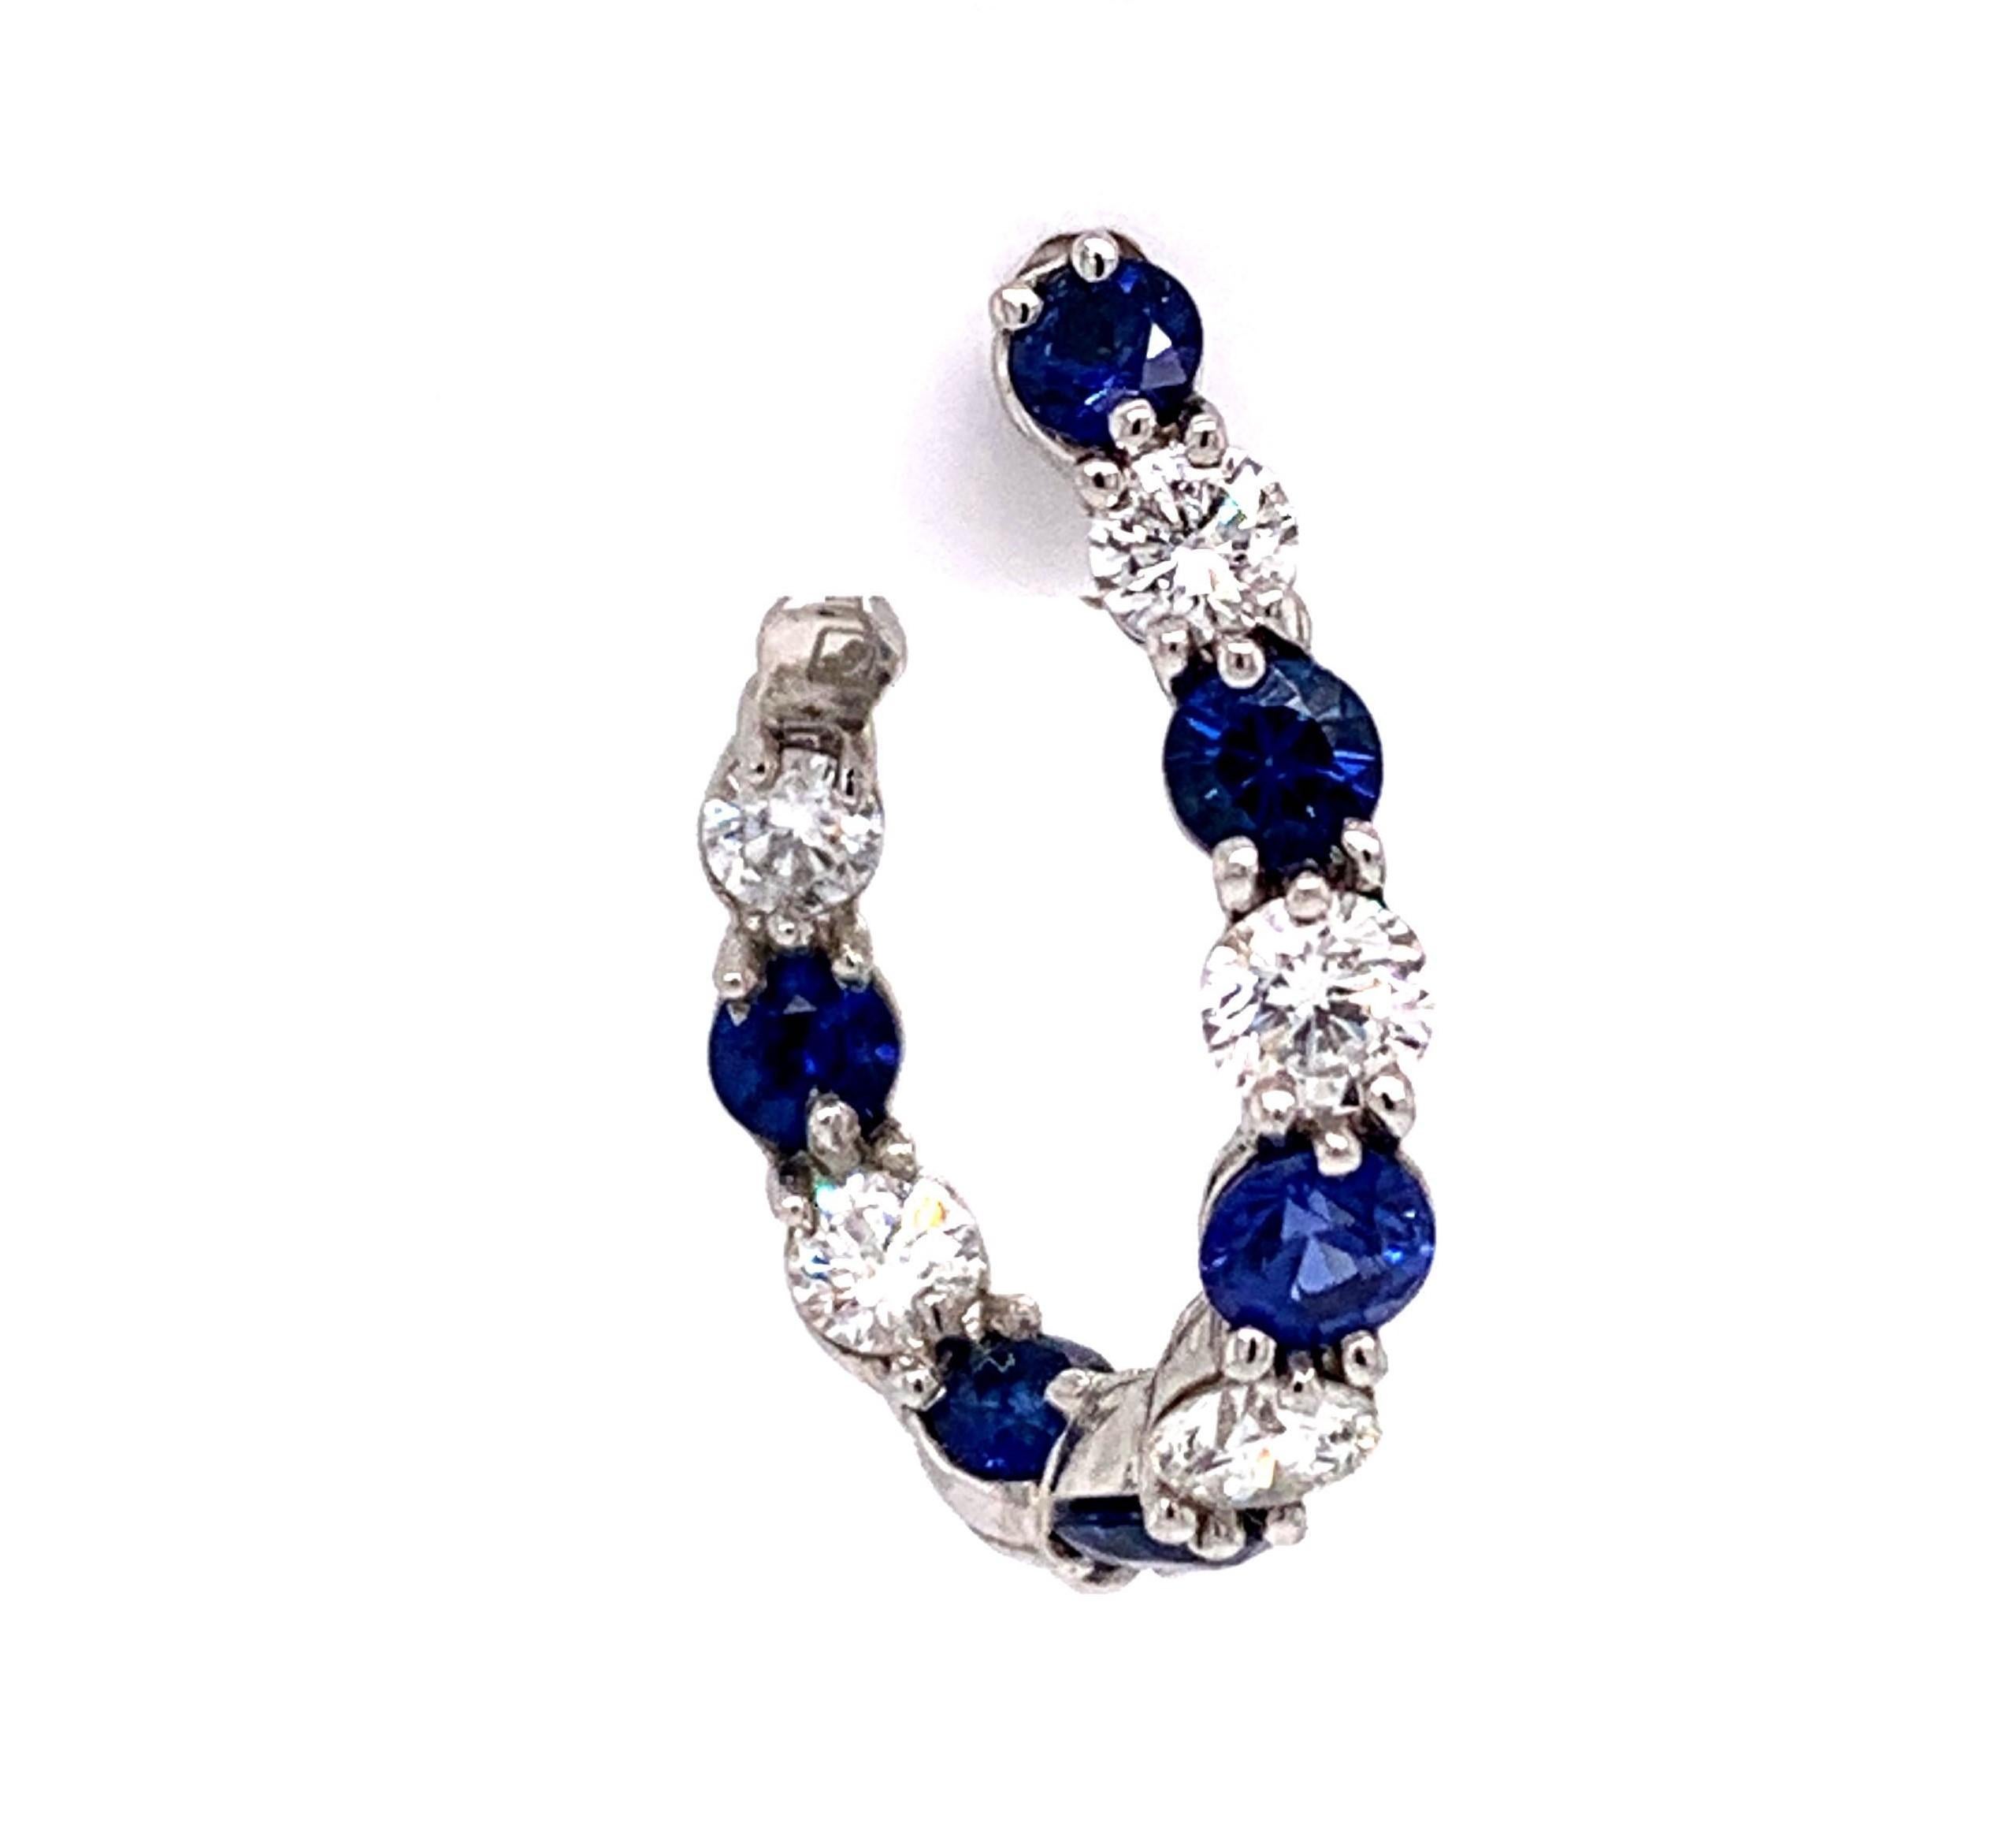 Gumuchian New Moon .90cttw Diamond and Blue Sapphire Platinum Hoop Earrings

Condition:  Excellent Condition, Professionally Cleaned and Polished
Metal:  Platinum
Weight:  6.7g
Gemstone:  12 Round Medium Blue Sapphires 1.25cttw
Diamonds:  10 Round